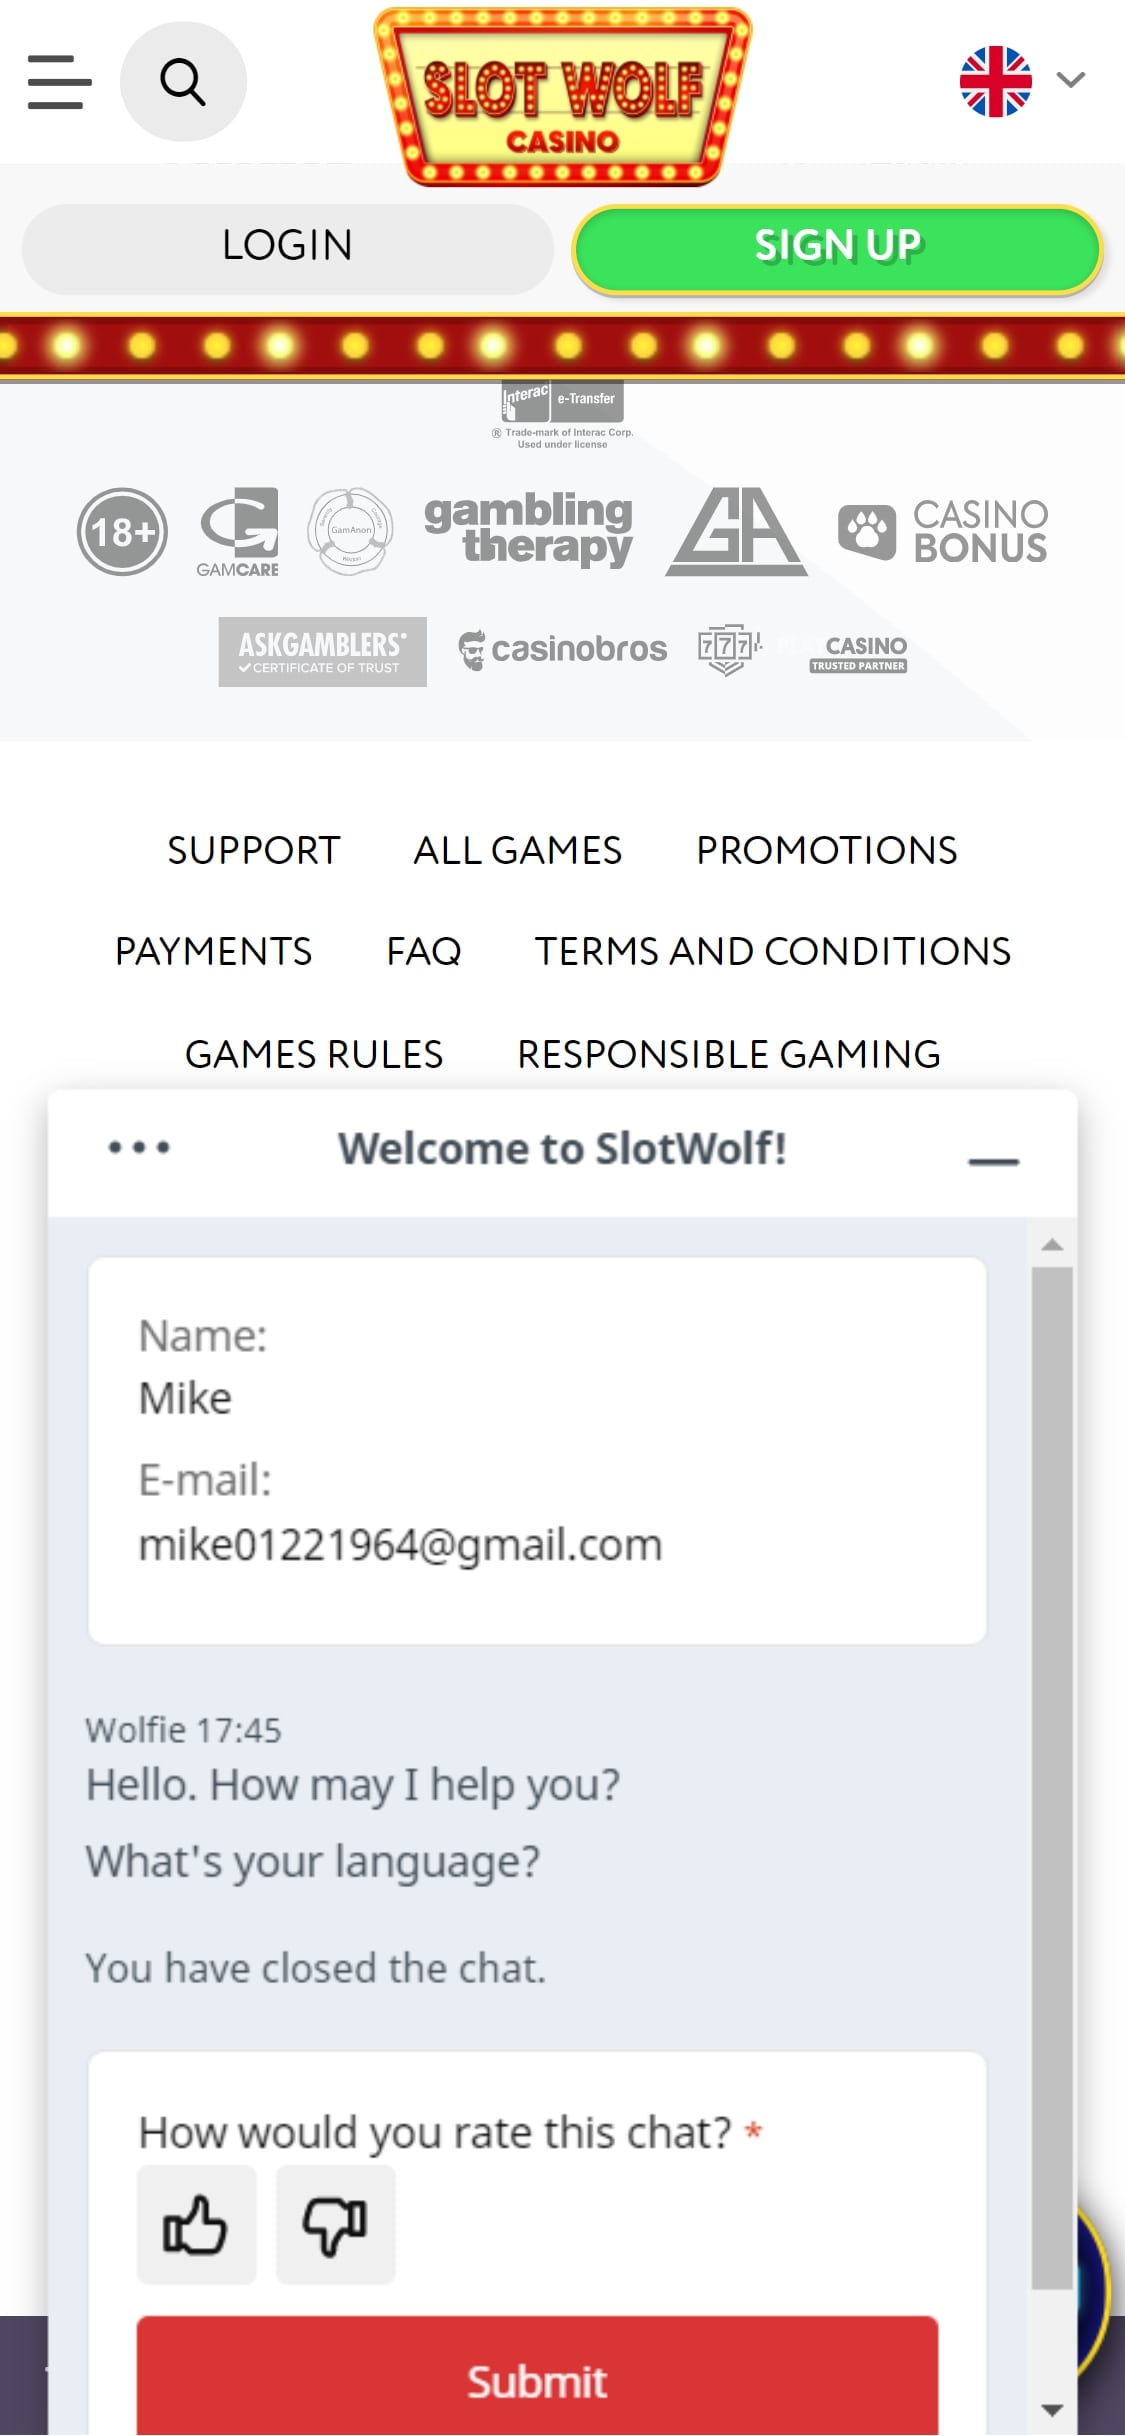 SlotWolf Casino Mobile Support Review